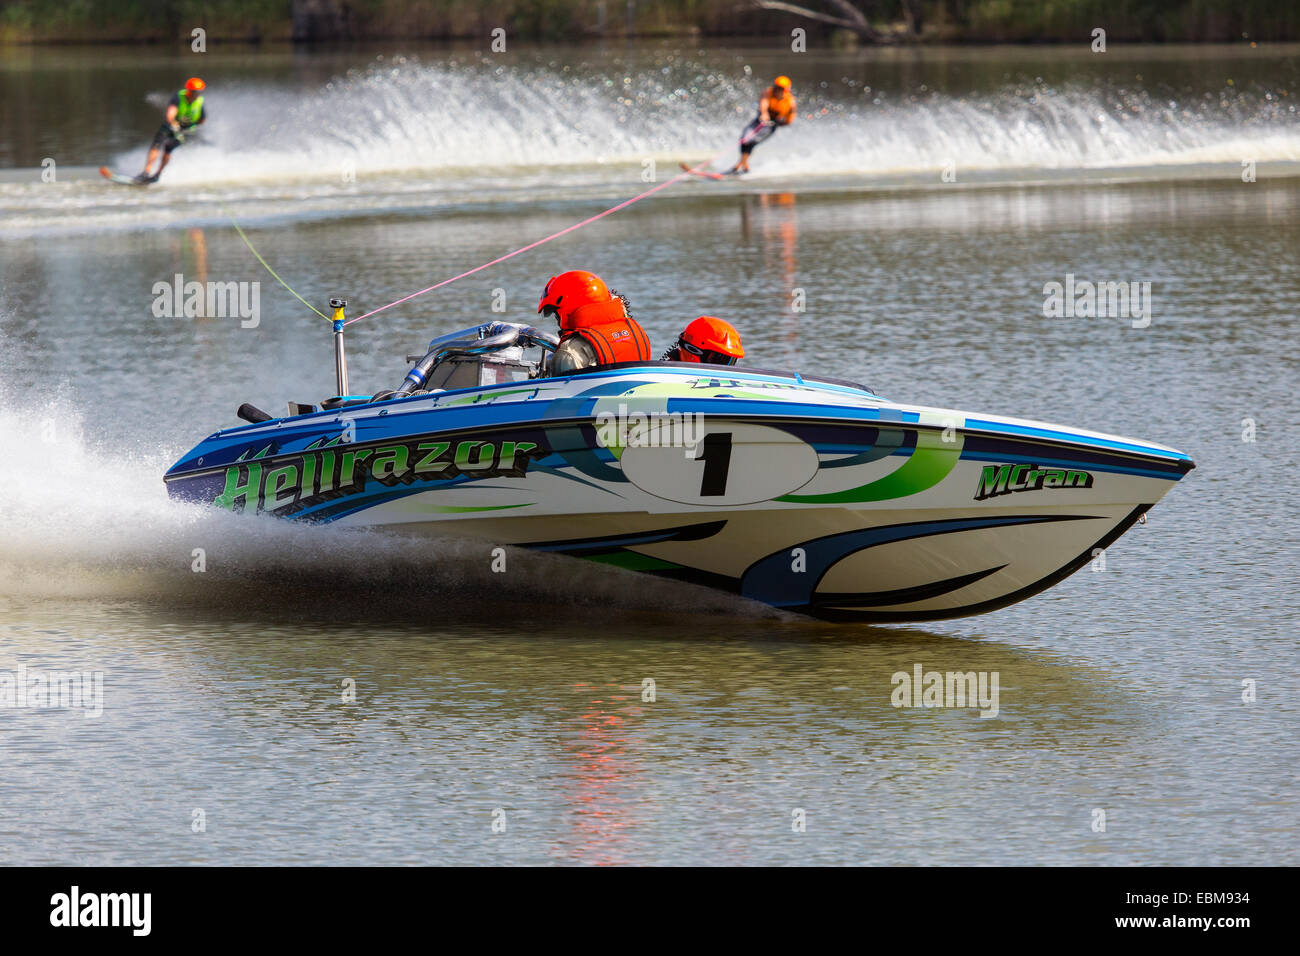 Hellrazor exciting the Darling River into the Murray River at Wentworth during Ted Hurley Memorial Classic 2014 Stock Photo